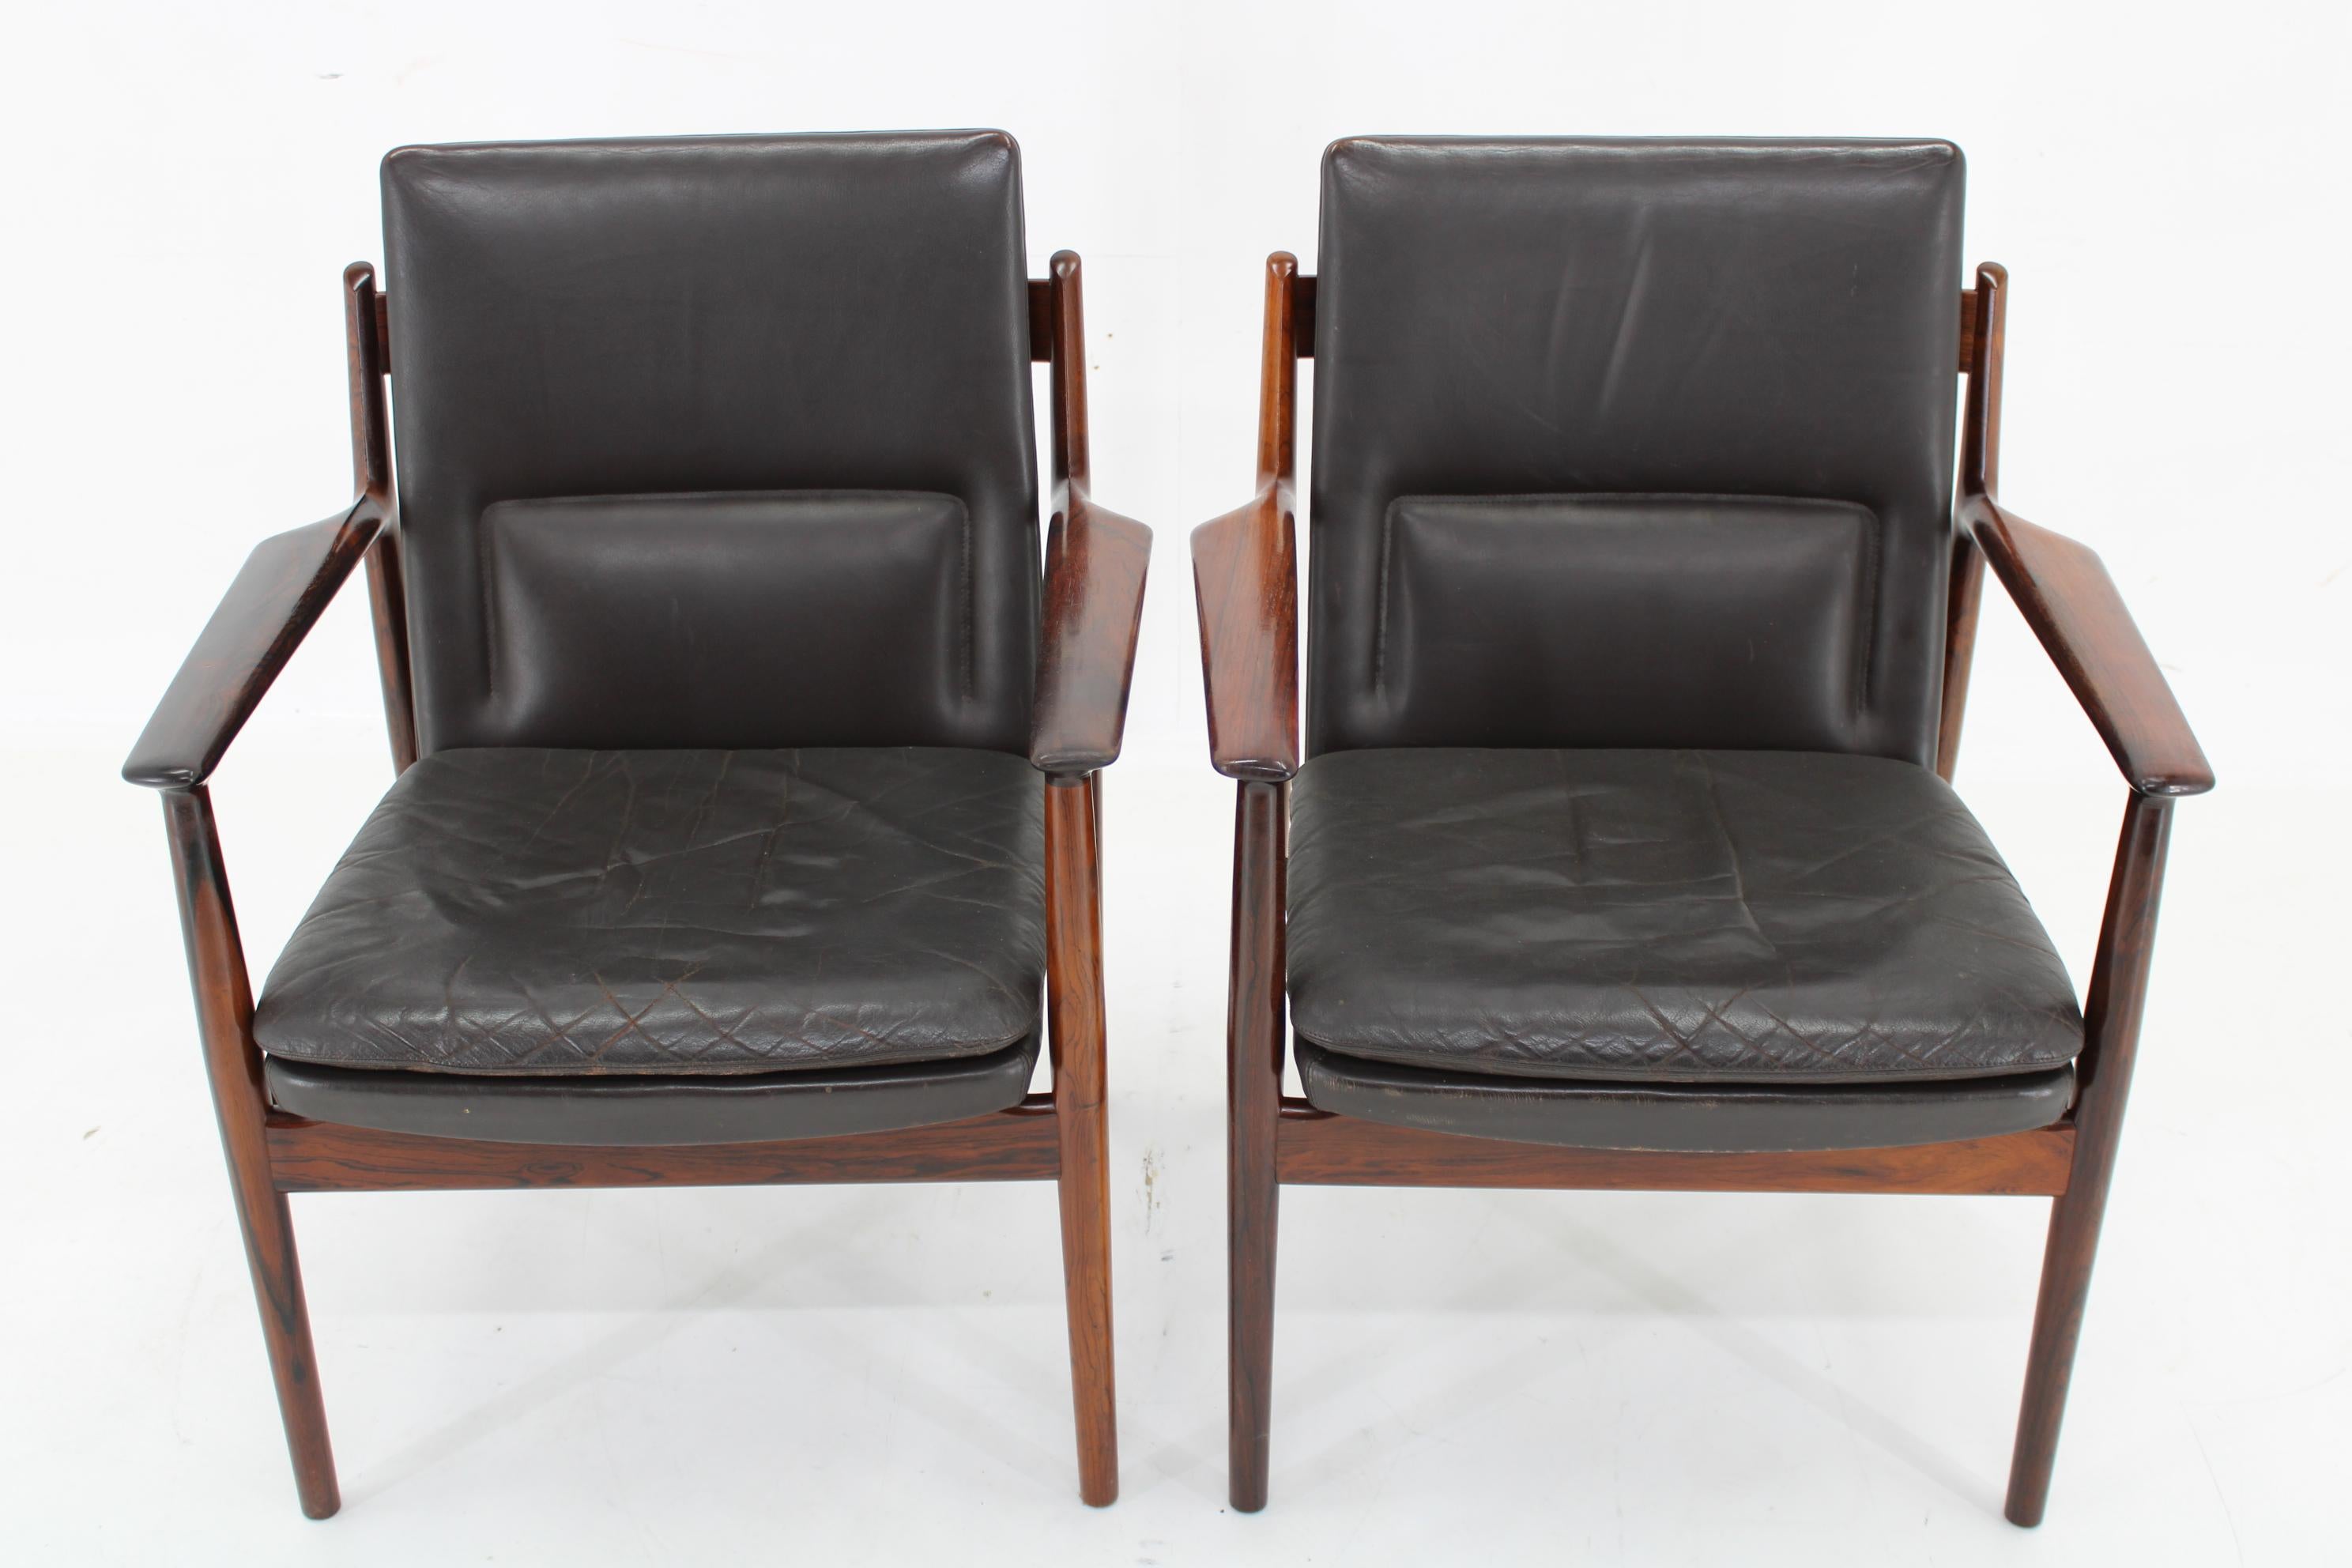 - Goog original condition with minor signs of use 
- Made of solid palisander wood 
- Armrests 61cm